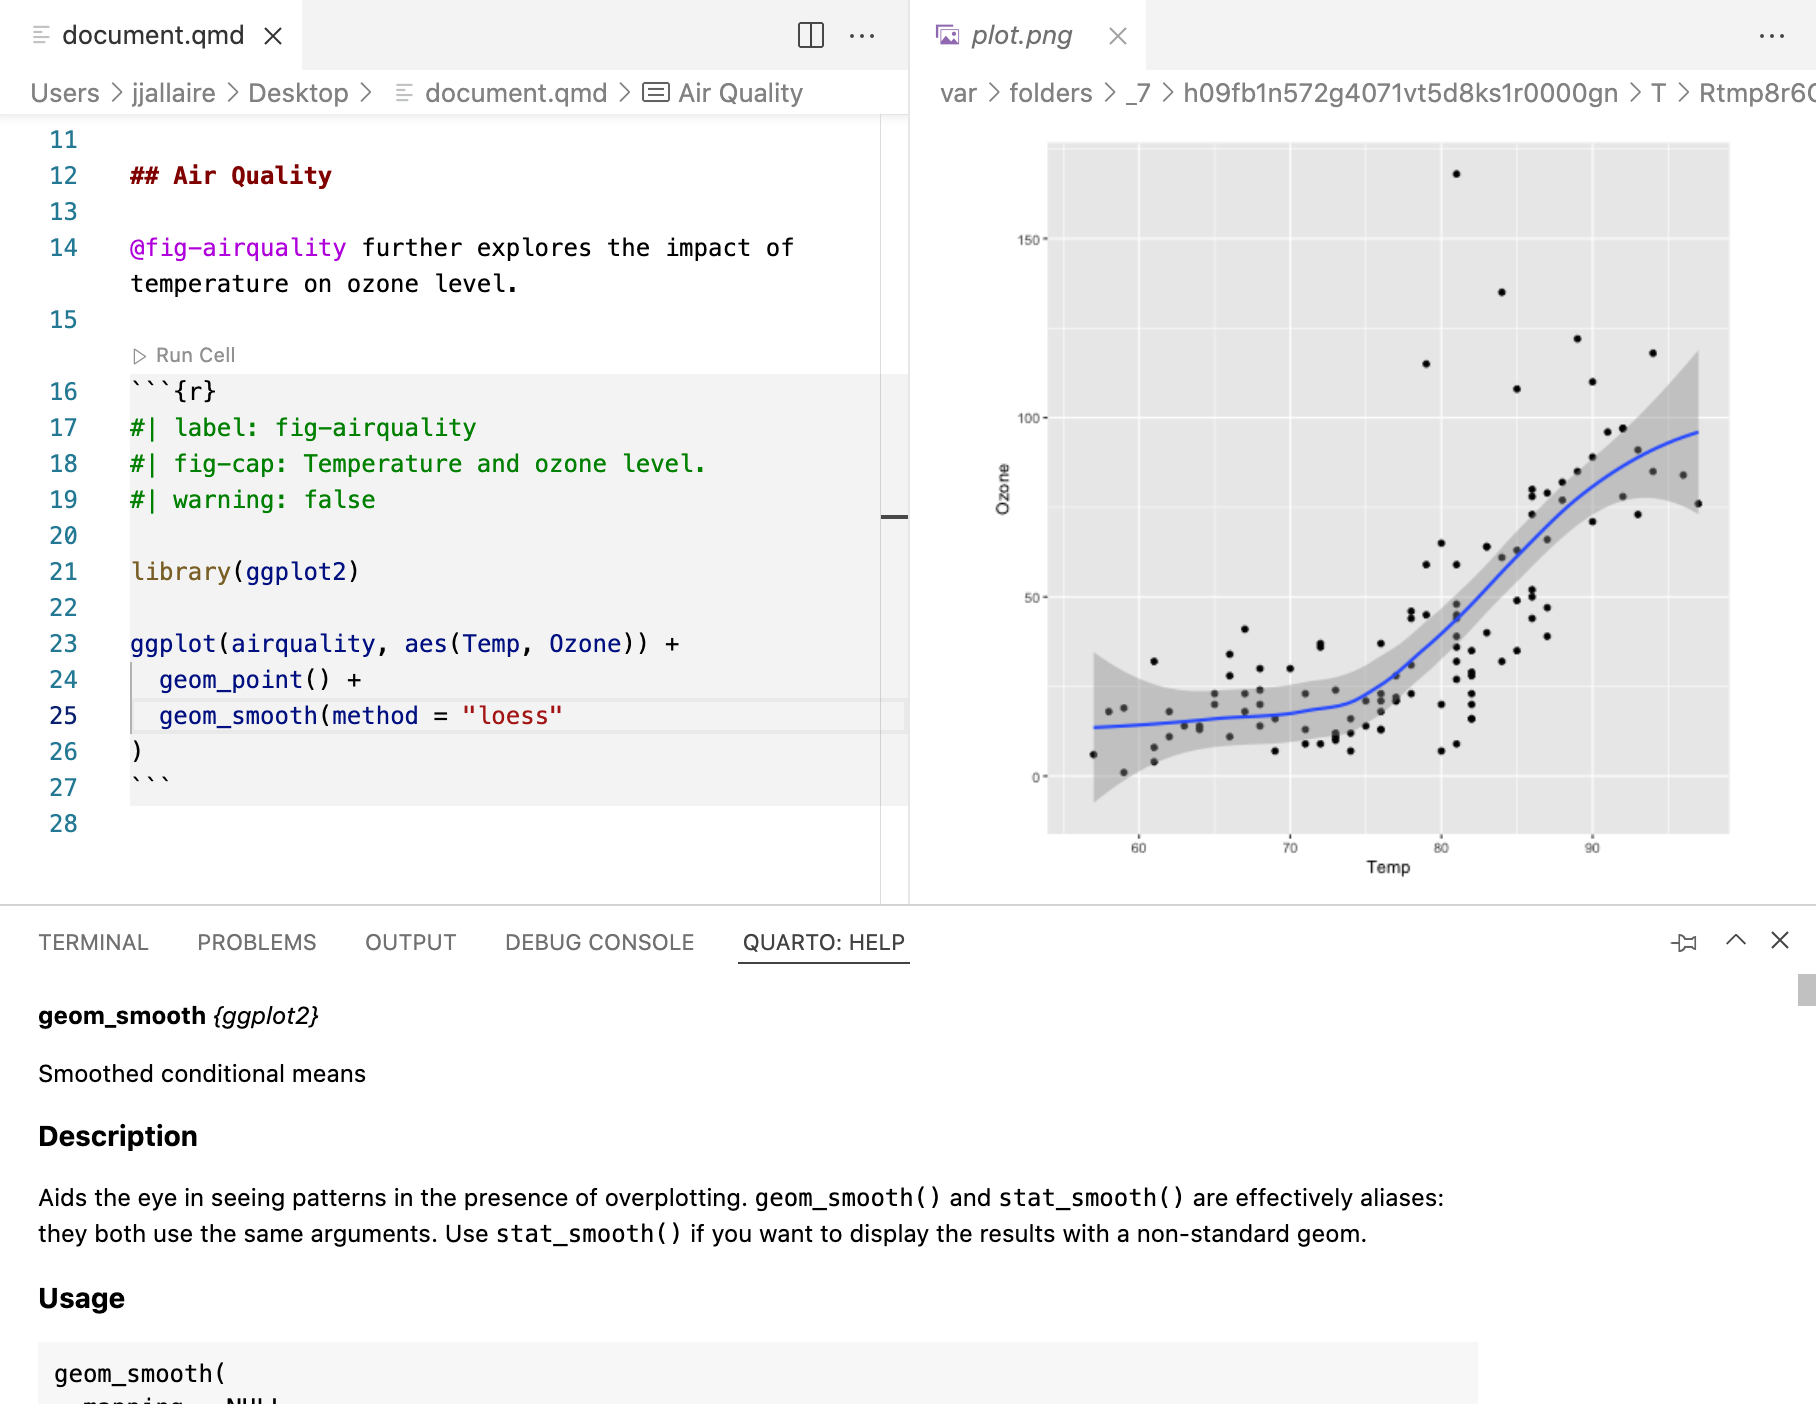 Screen shot of qmd file open in VS code with source markdown shown in left pane and ouput plot shown in the right.